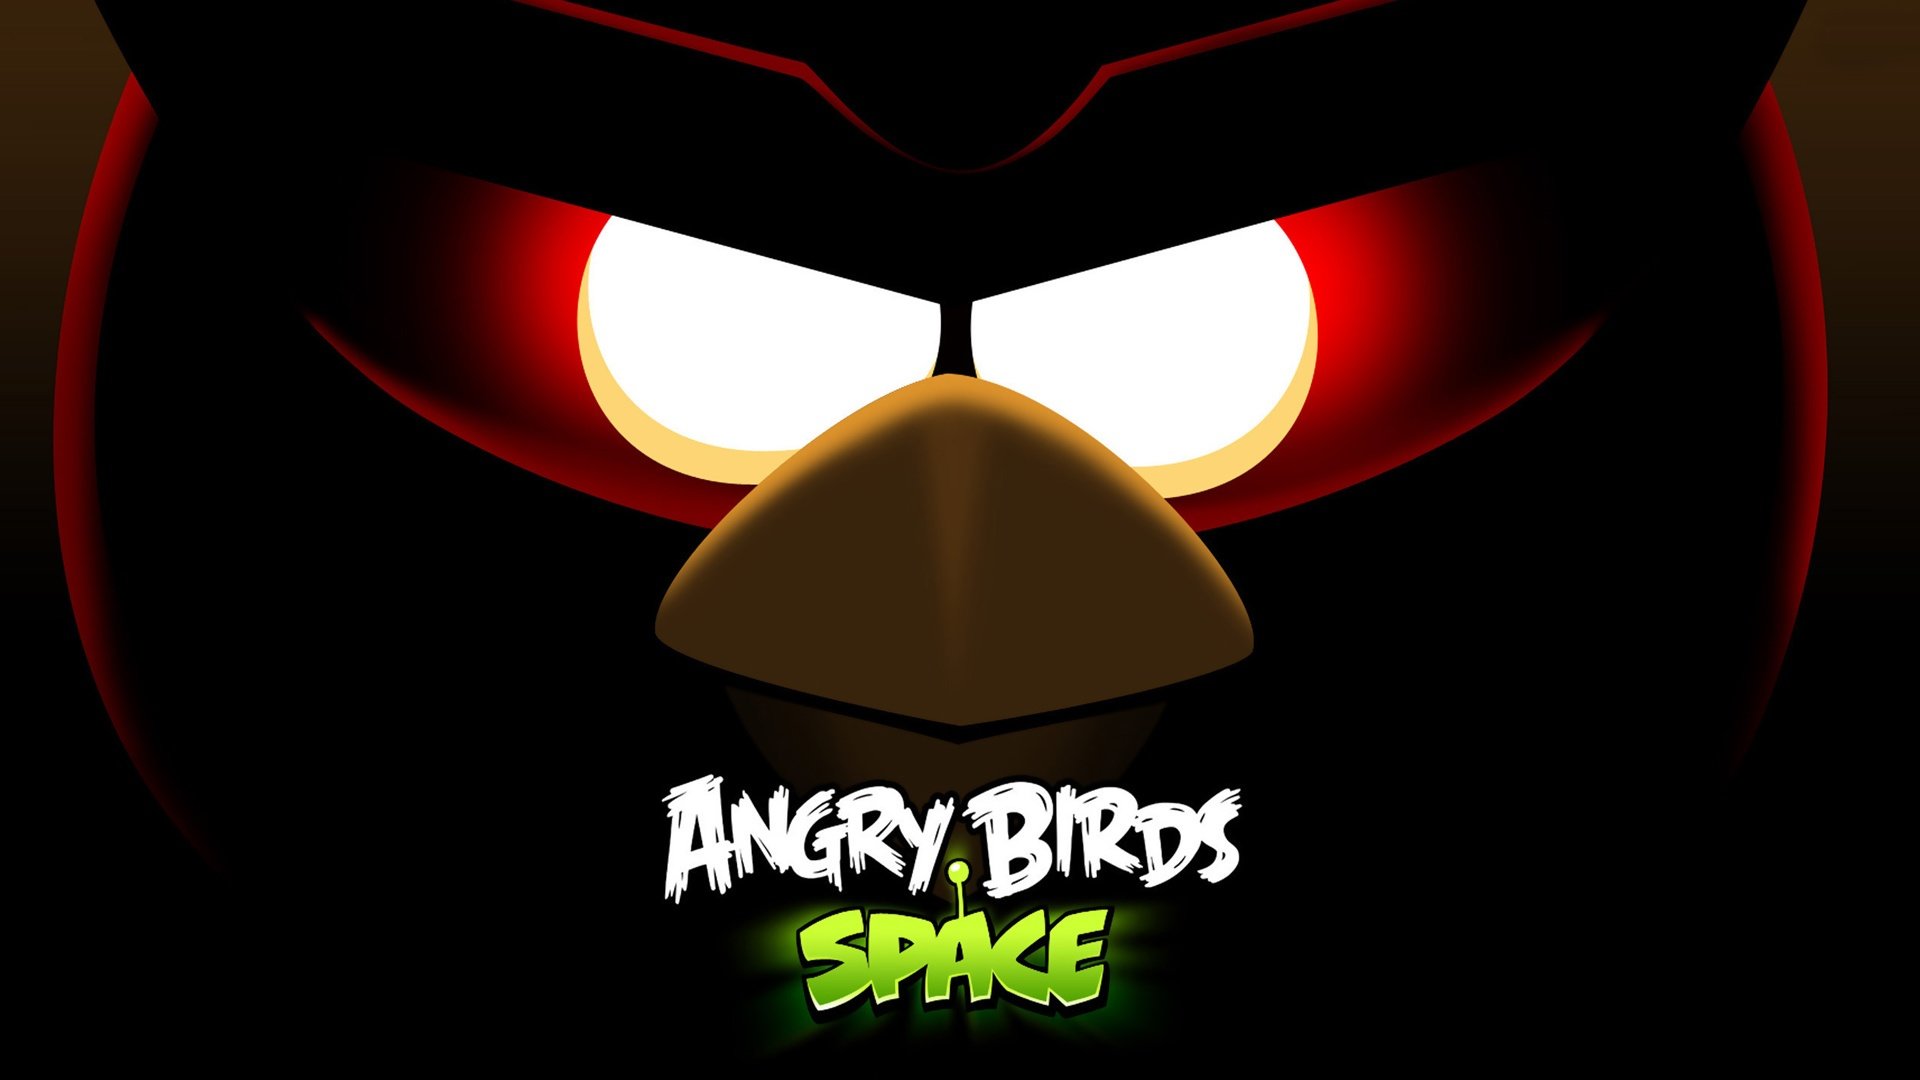 High Resolution Angry Birds Hd Wallpaper Id - Angry Bird Space Hd - HD Wallpaper 